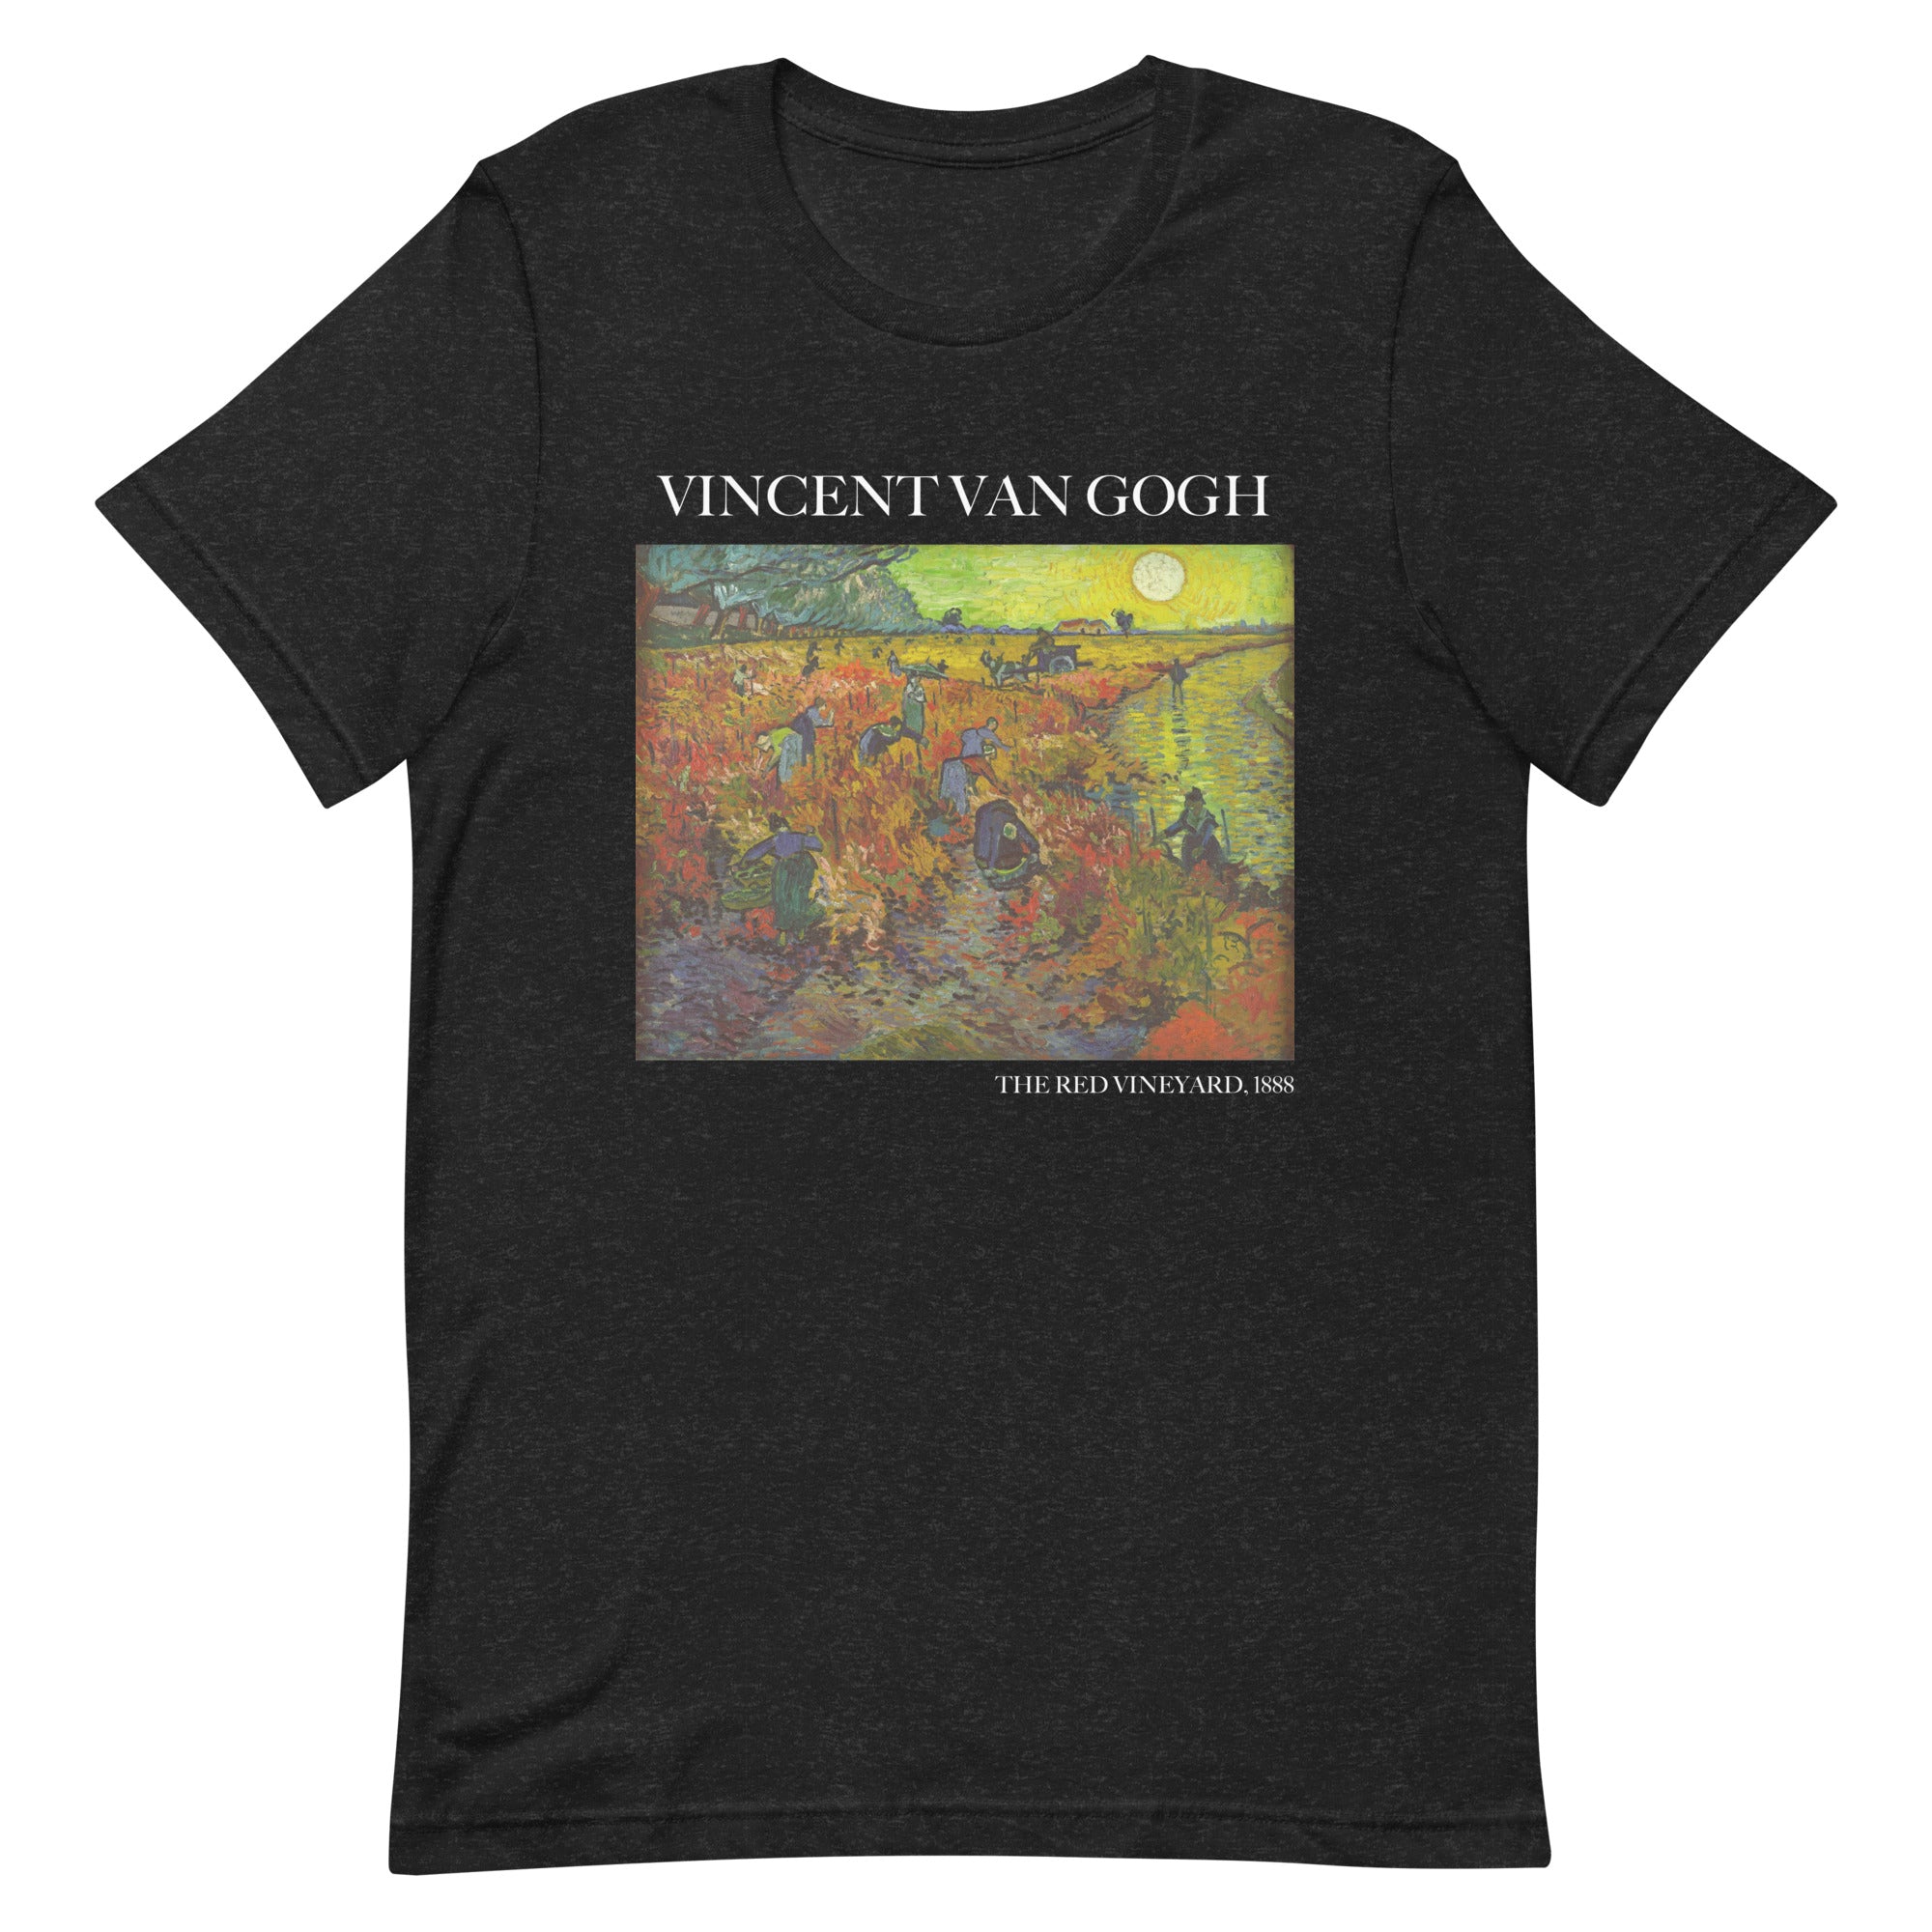 Vincent van Gogh 'The Red Vineyard' Famous Painting T-Shirt | Unisex Classic Art Tee